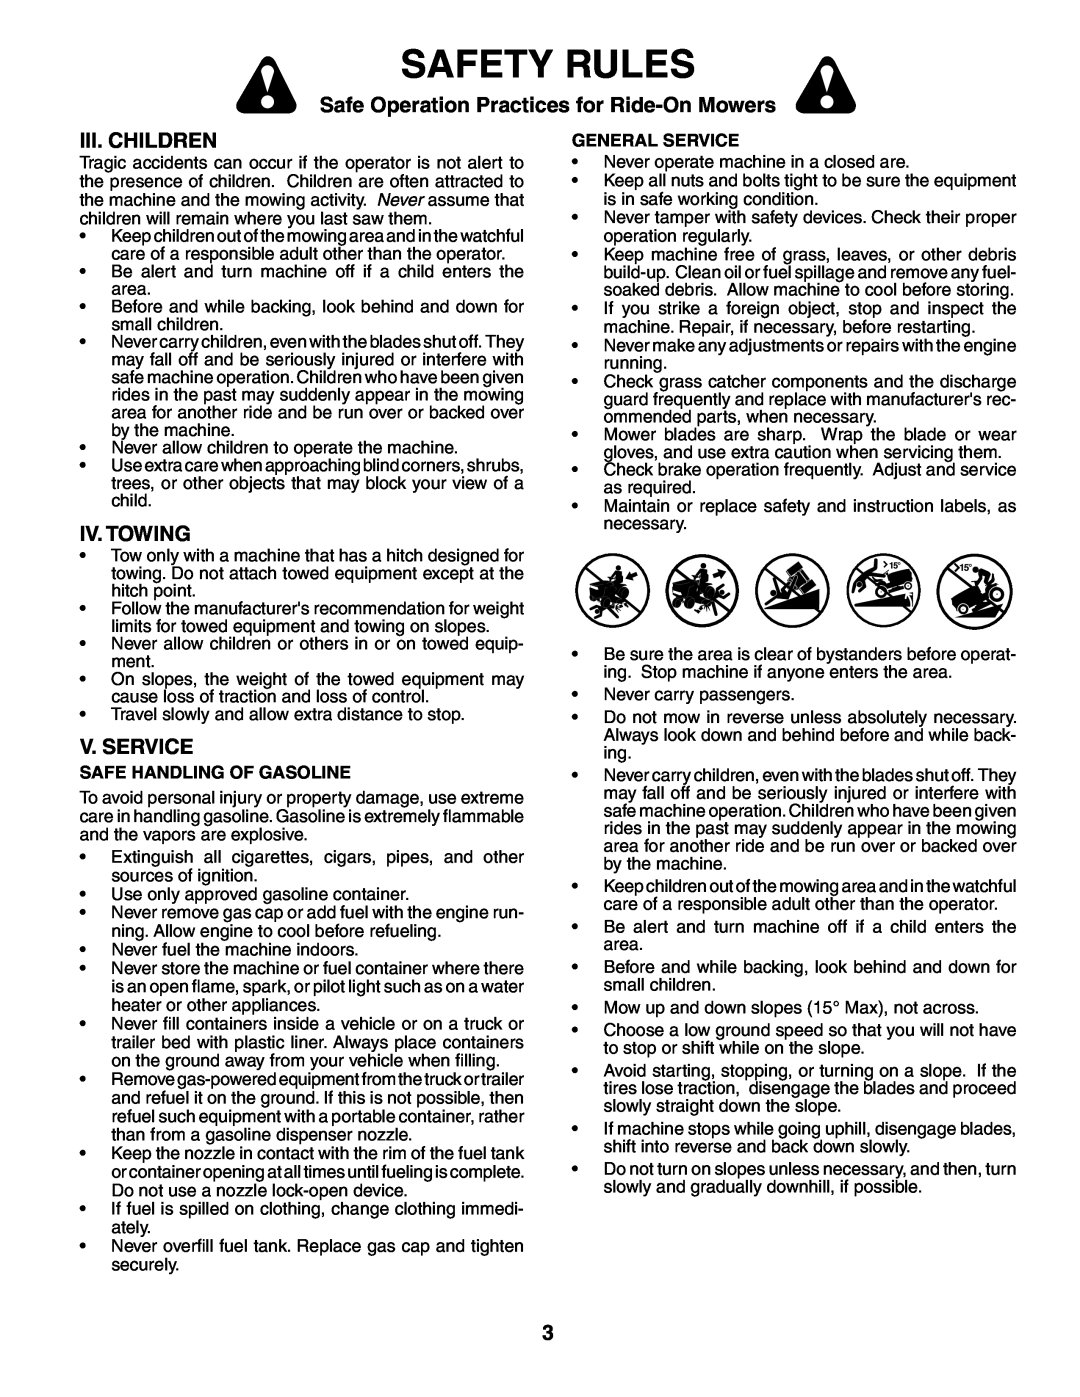 Poulan WE13538LT manual Iii. Children, Iv. Towing, V. Service, Safety Rules, Safe Operation Practices for Ride-OnMowers 